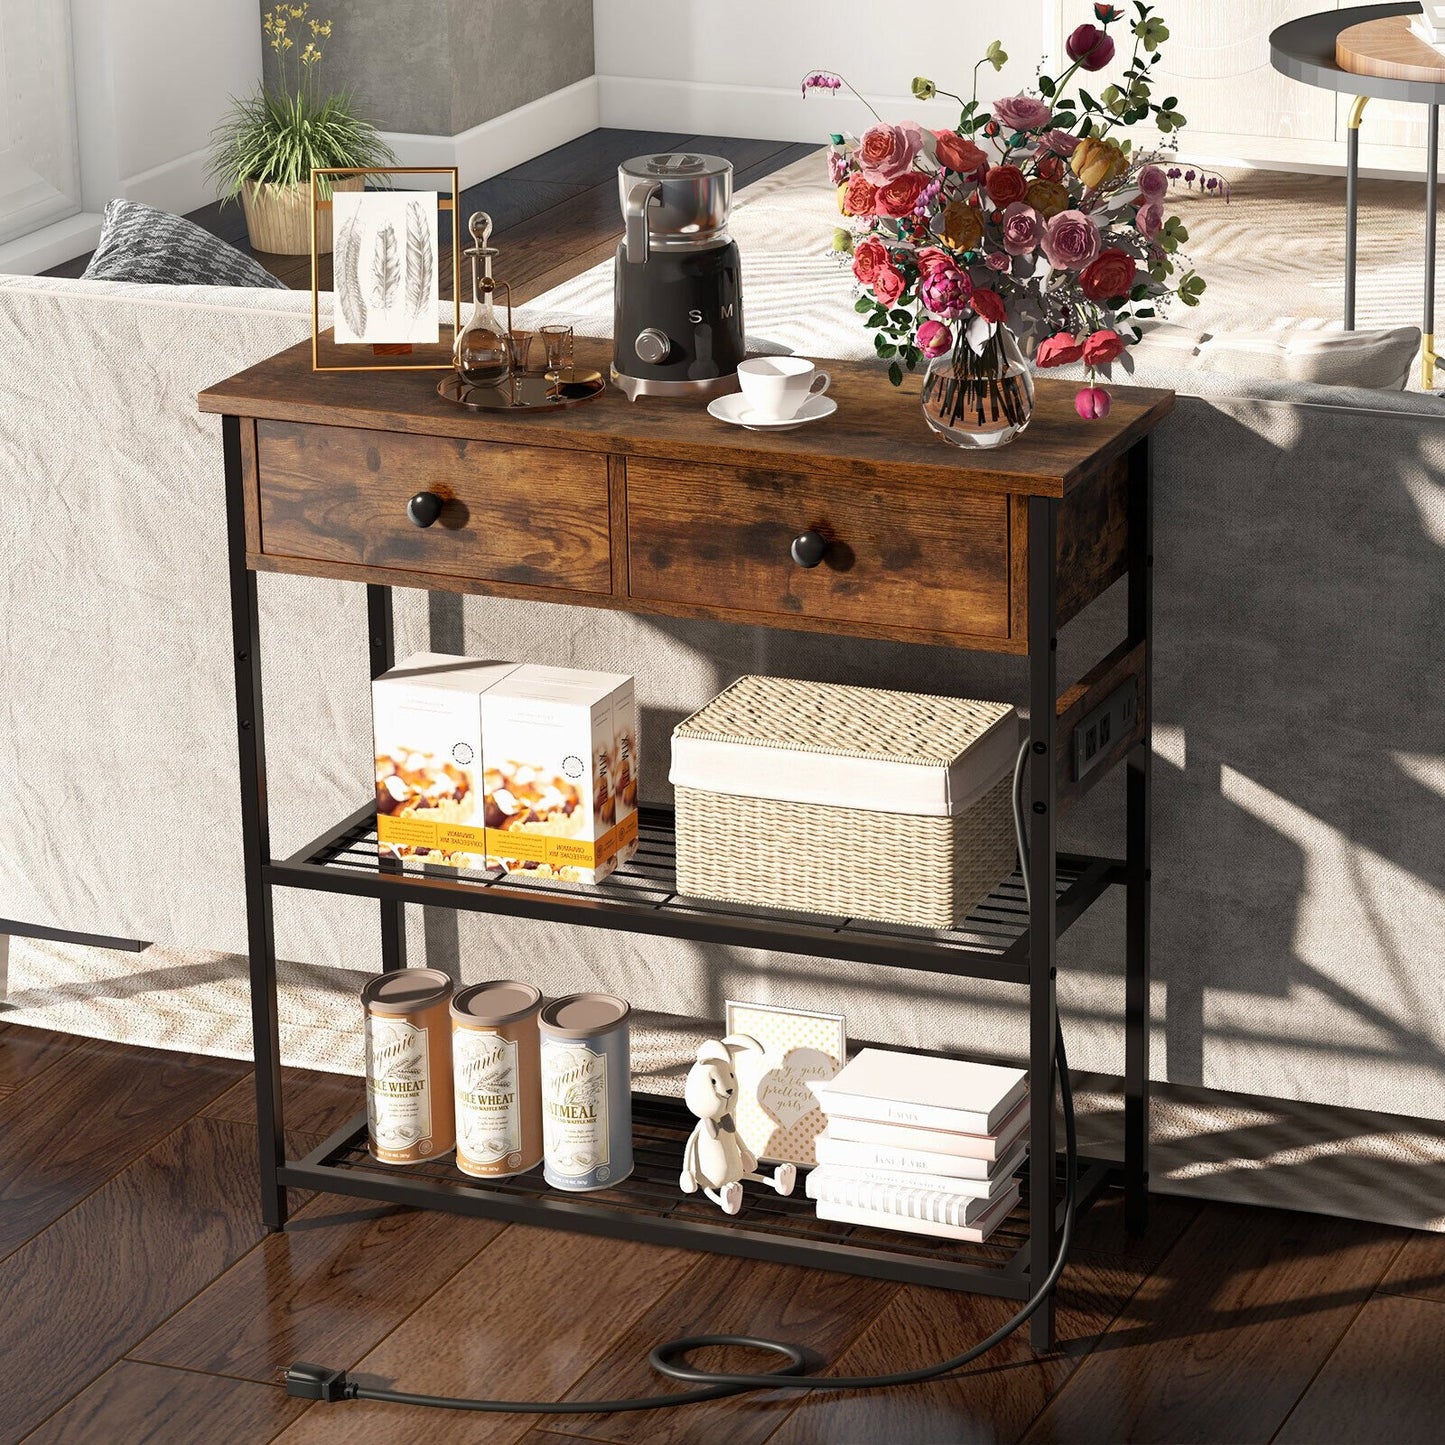 Narrow Console Table with 2 Drawers and 2 Metal Mesh Shelves, Rustic Brown